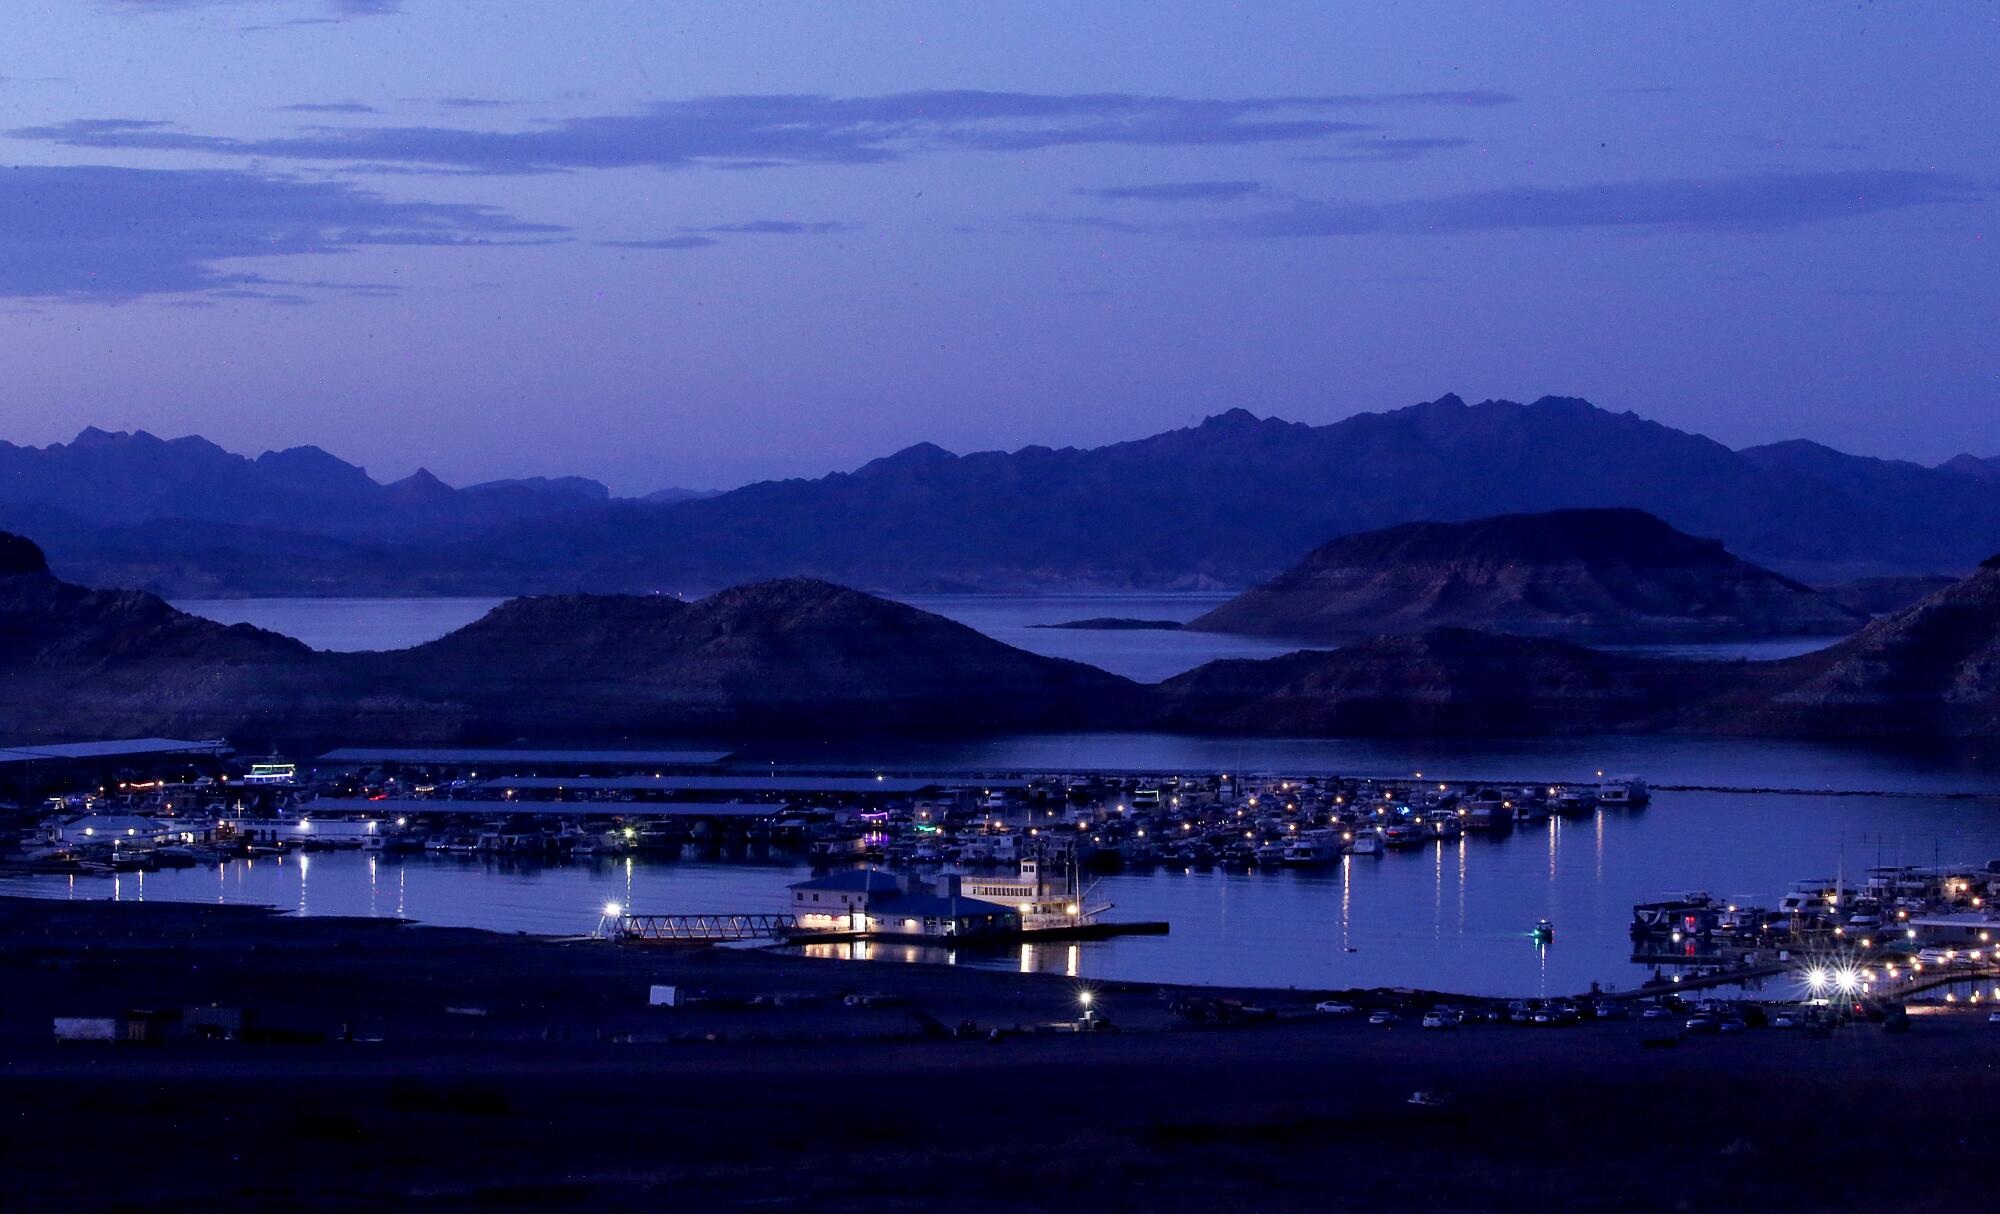 Lights from the Lake Mead Marina twinkle at dusk.